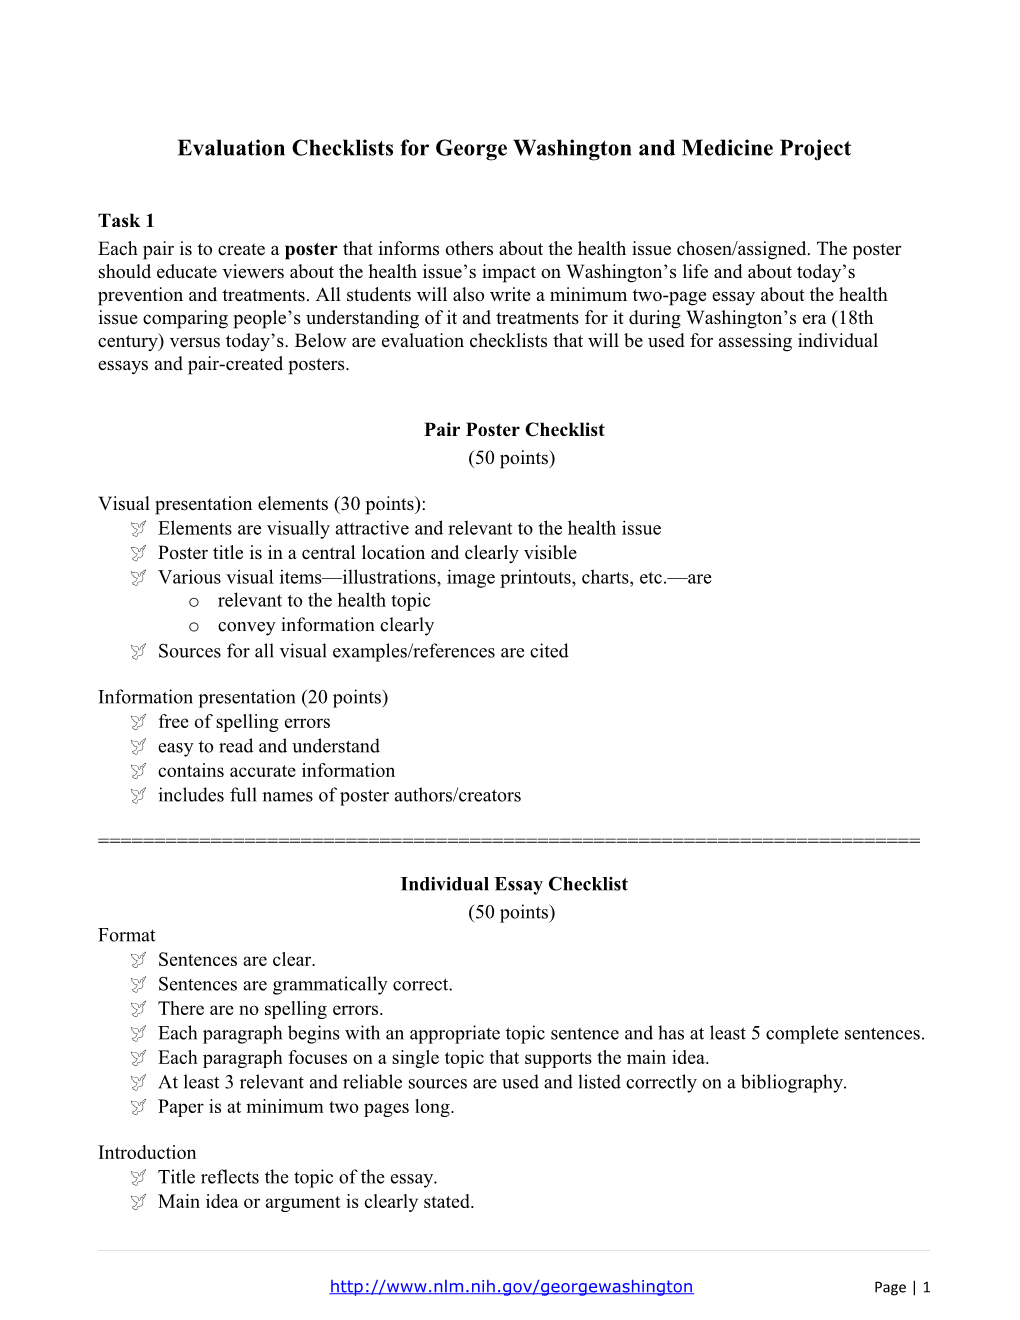 Evaluation Checklists for George Washington and Medicine Project